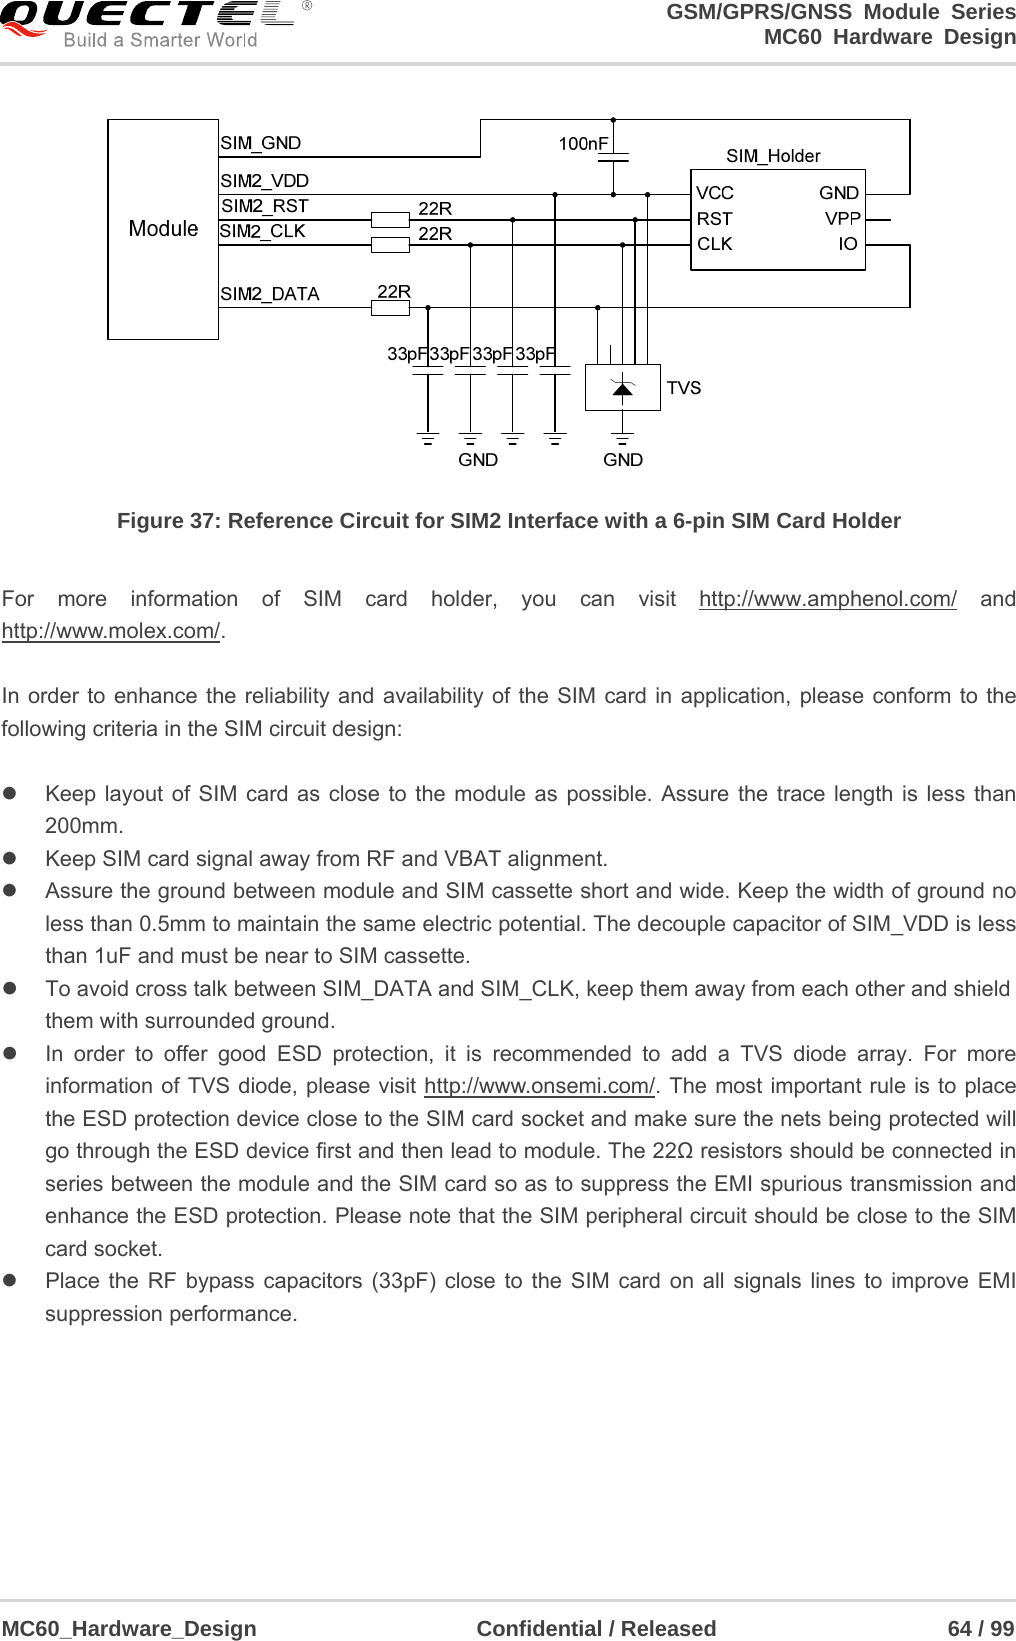                                                                     GSM/GPRS/GNSS Module Series                                                                 MC60 Hardware Design  MC60_Hardware_Design                    Confidential / Released                     64 / 99      Figure 37: Reference Circuit for SIM2 Interface with a 6-pin SIM Card Holder  For more information of SIM card holder, you can visit http://www.amphenol.com/ and http://www.molex.com/.  In order to enhance the reliability and availability of the SIM card in application, please conform to the following criteria in the SIM circuit design:    Keep layout of SIM card as close to the module as possible. Assure the trace length is less than 200mm.    Keep SIM card signal away from RF and VBAT alignment.   Assure the ground between module and SIM cassette short and wide. Keep the width of ground no less than 0.5mm to maintain the same electric potential. The decouple capacitor of SIM_VDD is less than 1uF and must be near to SIM cassette.       To avoid cross talk between SIM_DATA and SIM_CLK, keep them away from each other and shield them with surrounded ground.     In order to offer good ESD protection, it is recommended to add a TVS diode array. For more information of TVS diode, please visit http://www.onsemi.com/. The most important rule is to place the ESD protection device close to the SIM card socket and make sure the nets being protected will go through the ESD device first and then lead to module. The 22Ω resistors should be connected in series between the module and the SIM card so as to suppress the EMI spurious transmission and enhance the ESD protection. Please note that the SIM peripheral circuit should be close to the SIM card socket.     Place the RF bypass capacitors (33pF) close to the SIM card on all signals lines to improve EMI suppression performance.      